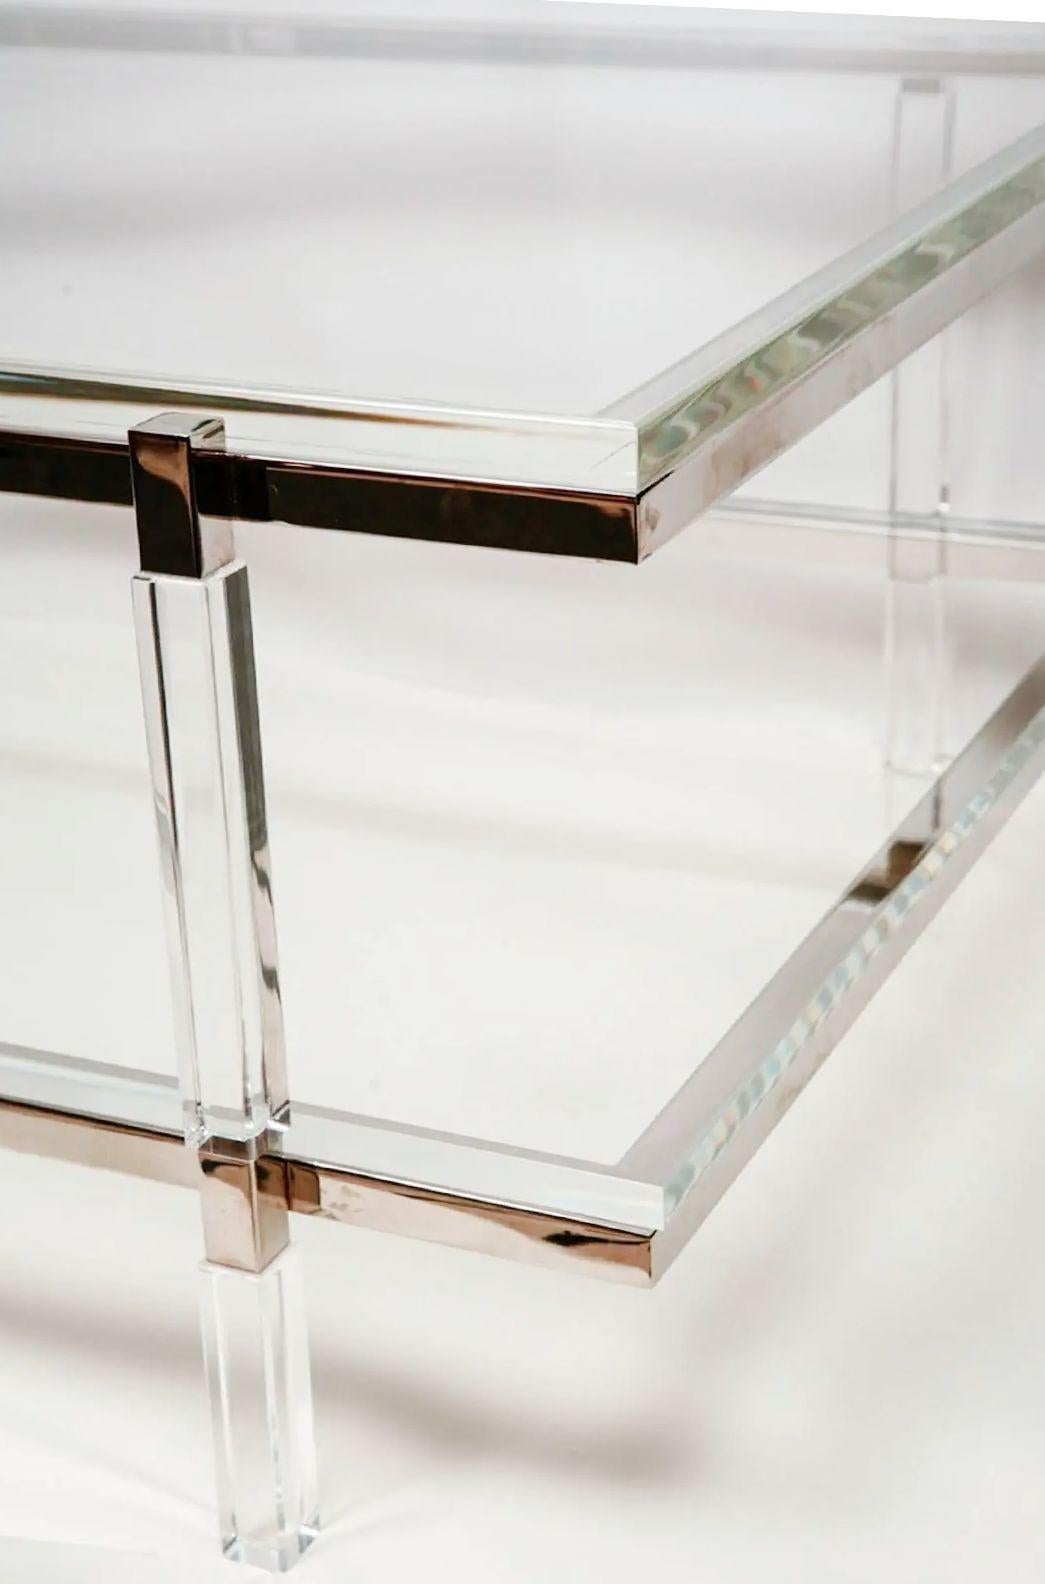 Vintage Two-tier lucite coffee table with chrome frame and details by Charles Hollis Jones for his Metric Collection designed in 1960's. The table's most striking feature is its elegant use of lucite, a material known for its transparency and